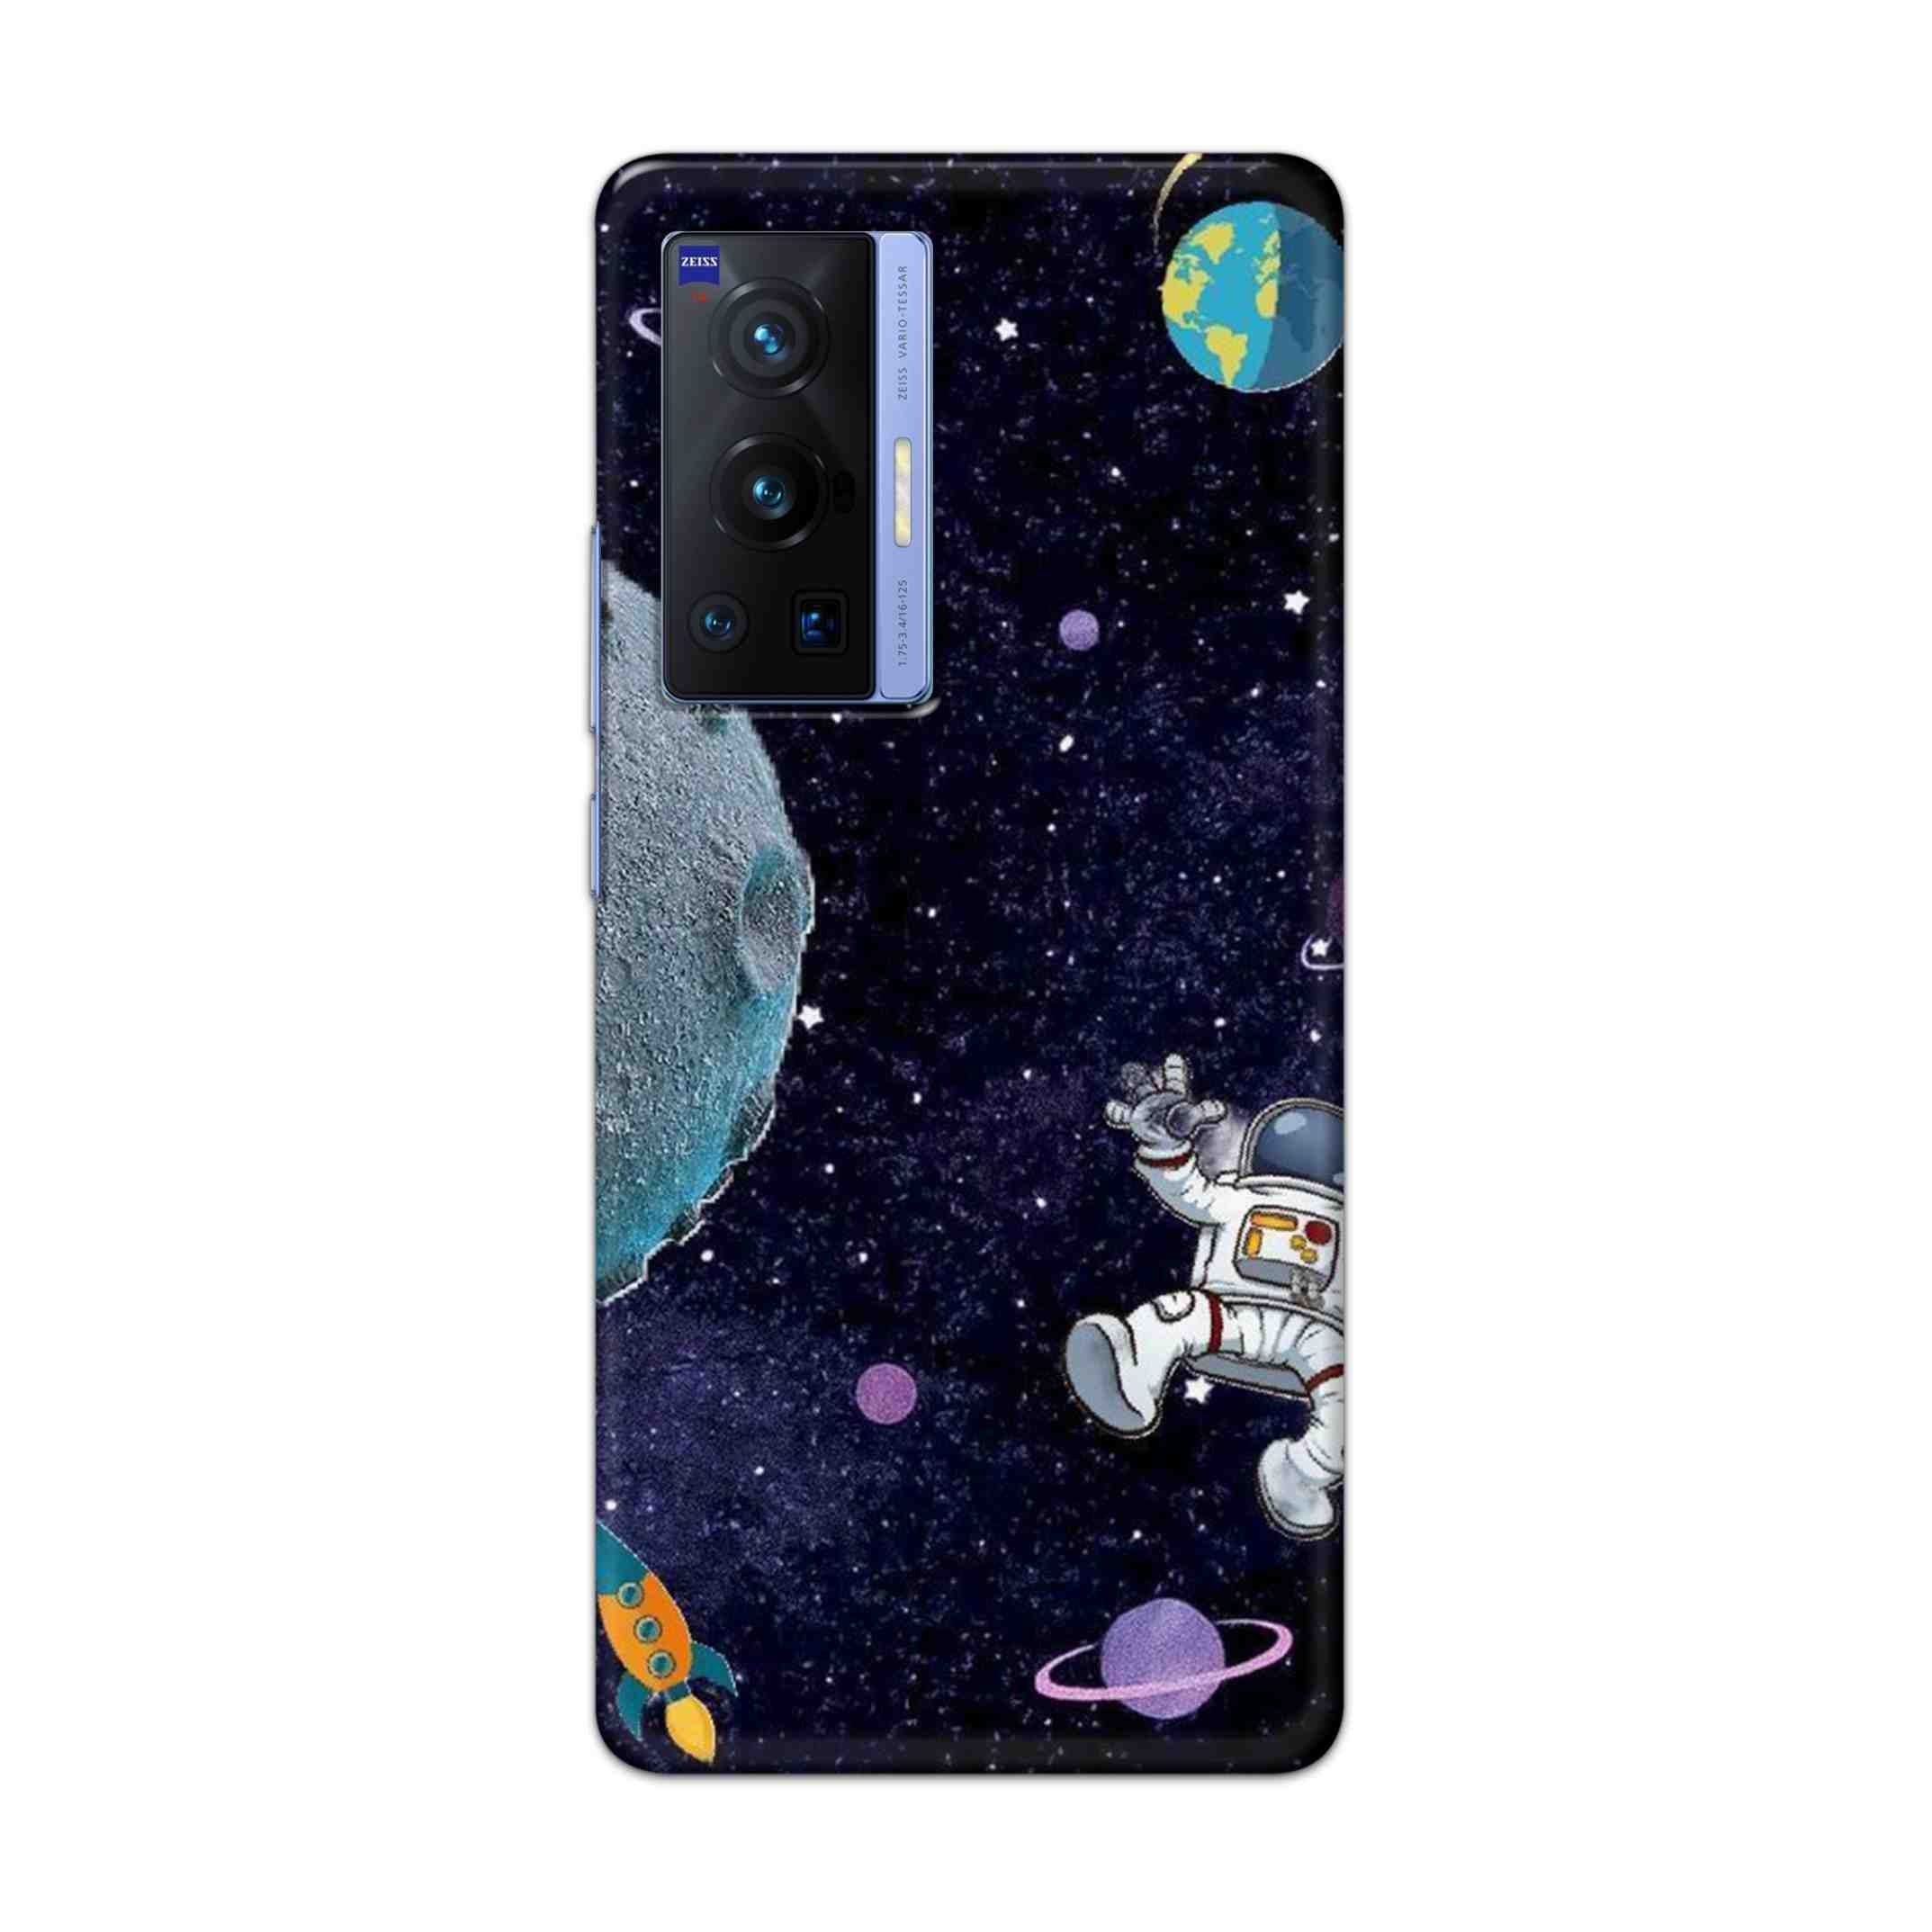 Buy Space Hard Back Mobile Phone Case Cover For Vivo X70 Pro Online